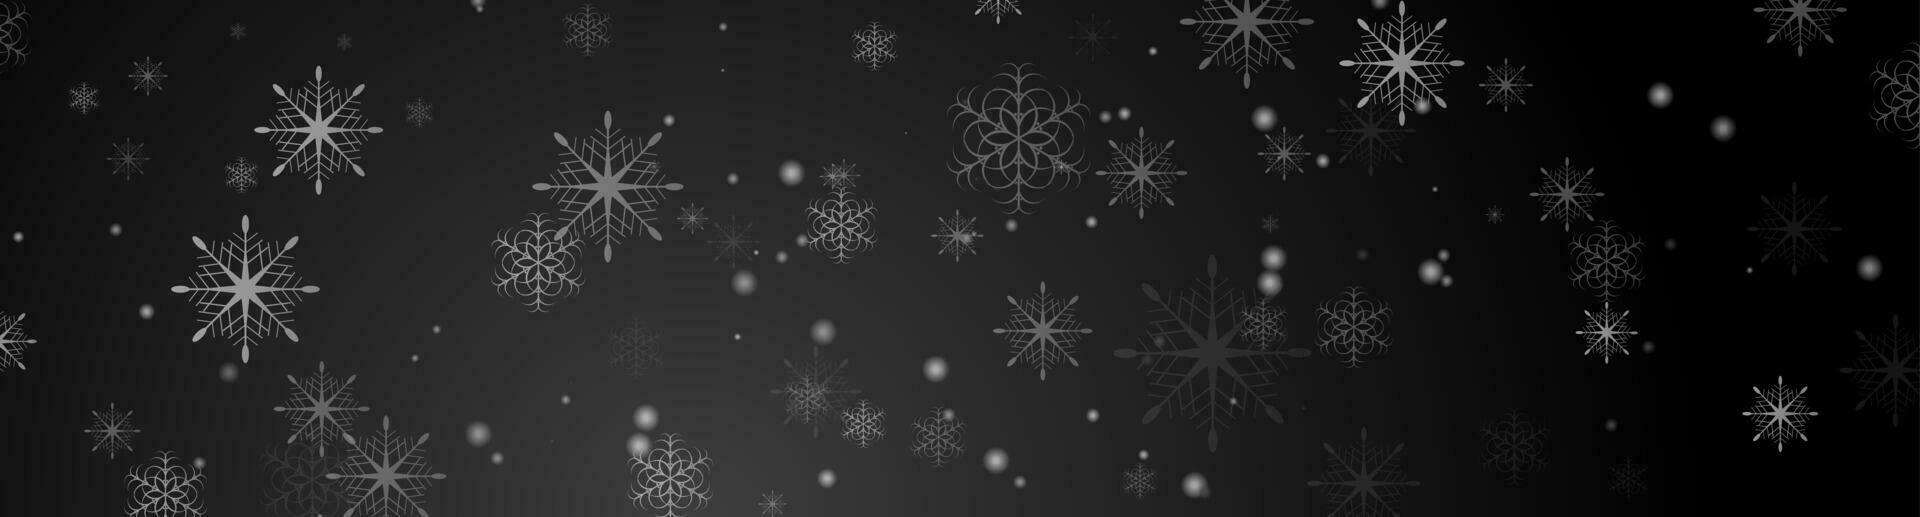 Black abstract snowflakes Christmas corporate banner design vector